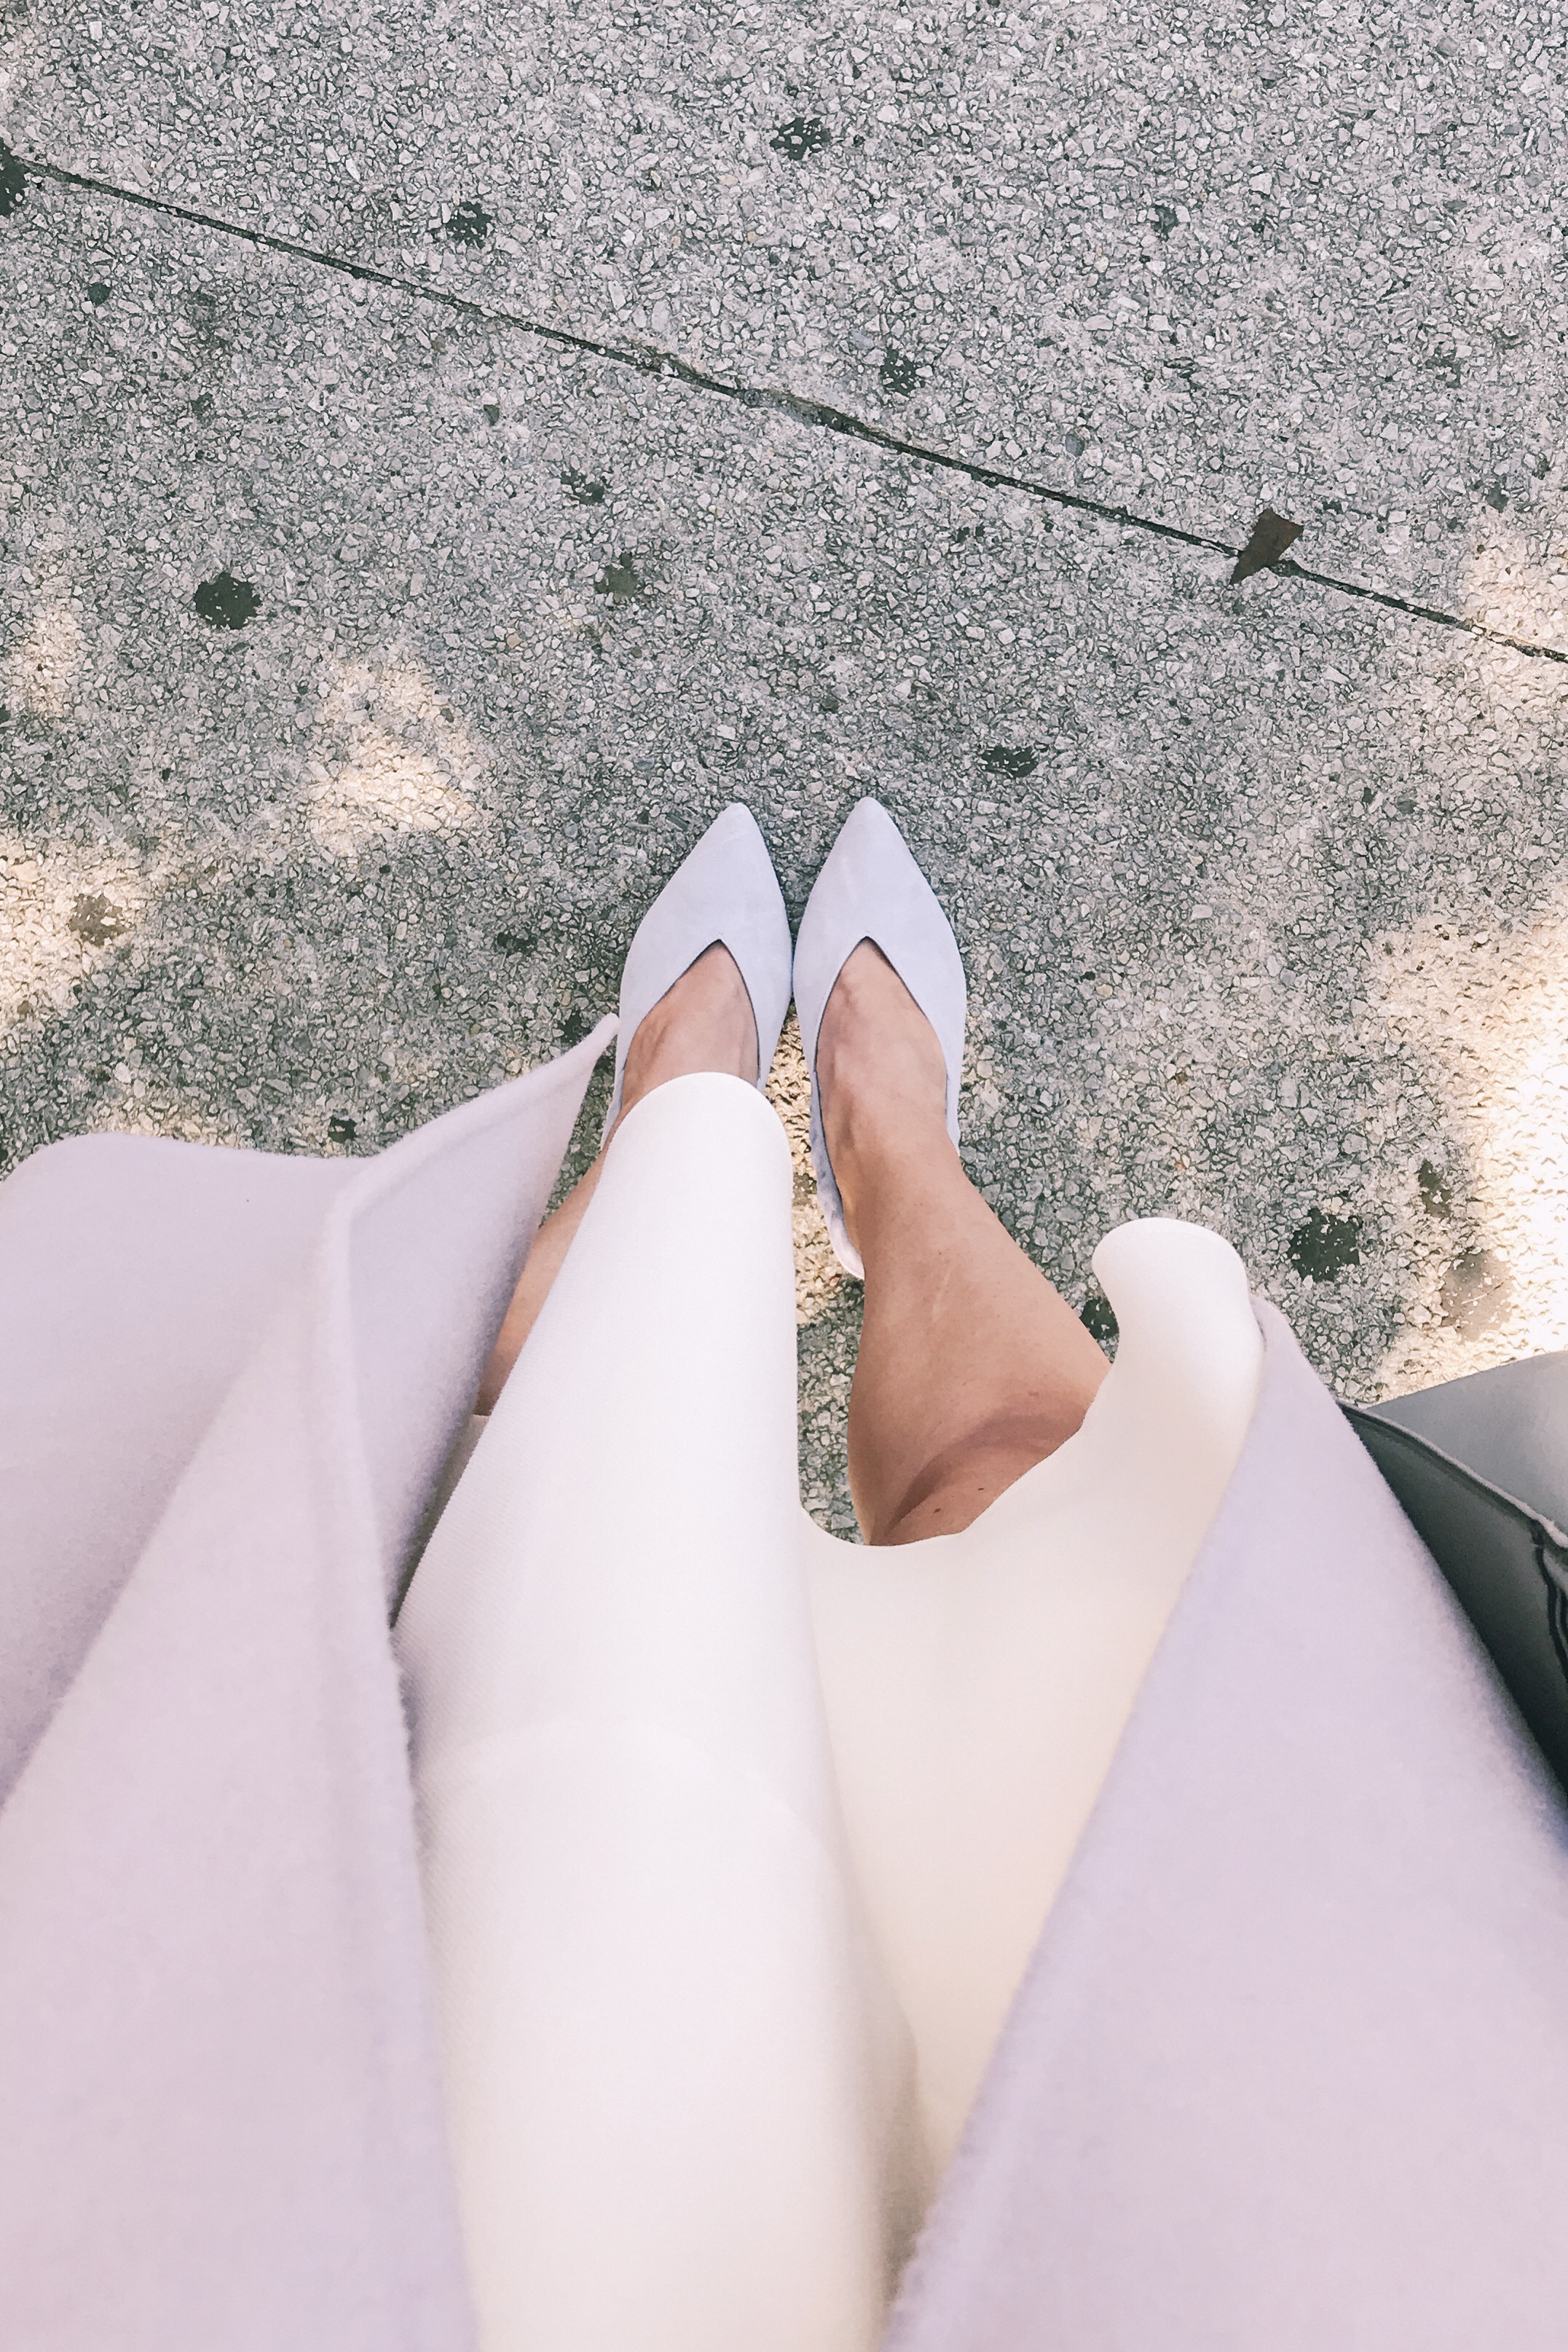 Classy lavender shoes | Miss Madeline Rose